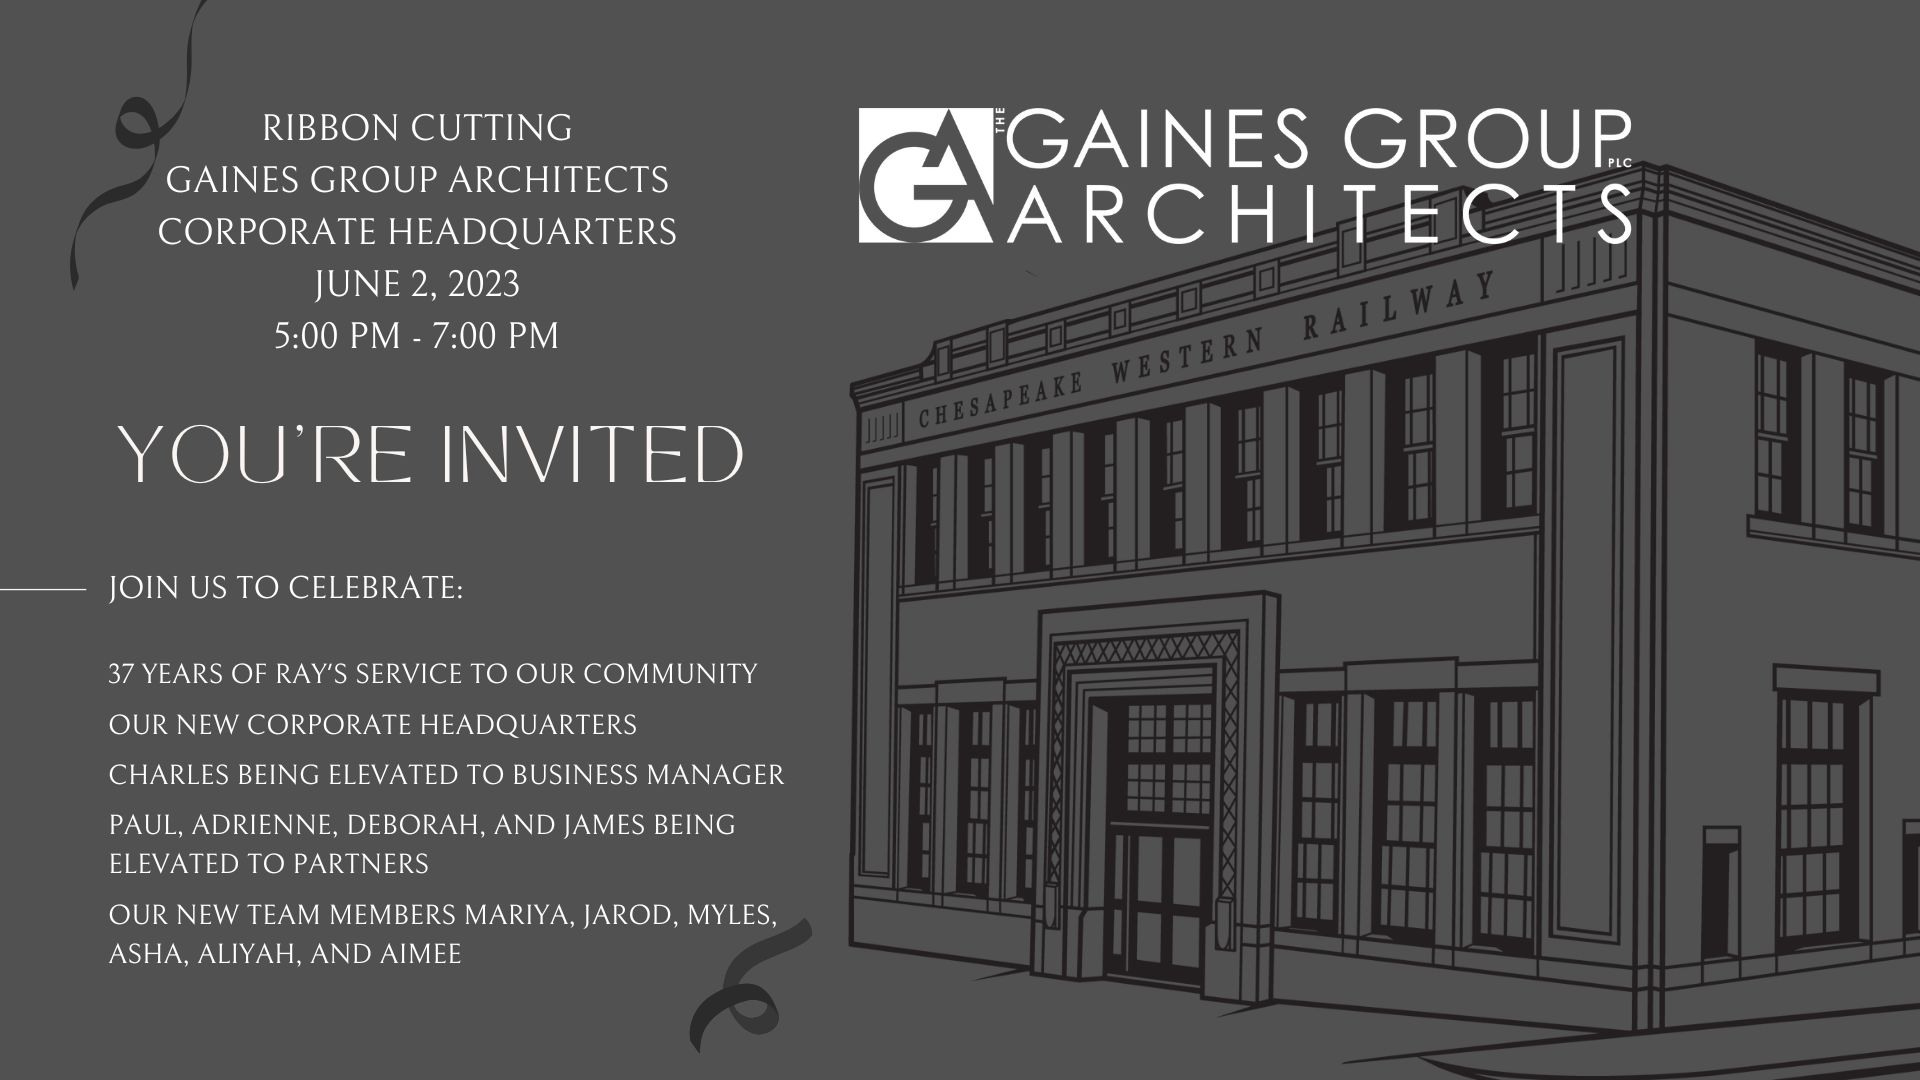 Poster inviting people to the Gaines Group Architects Corporate Headquarters Ribbon Cutting.